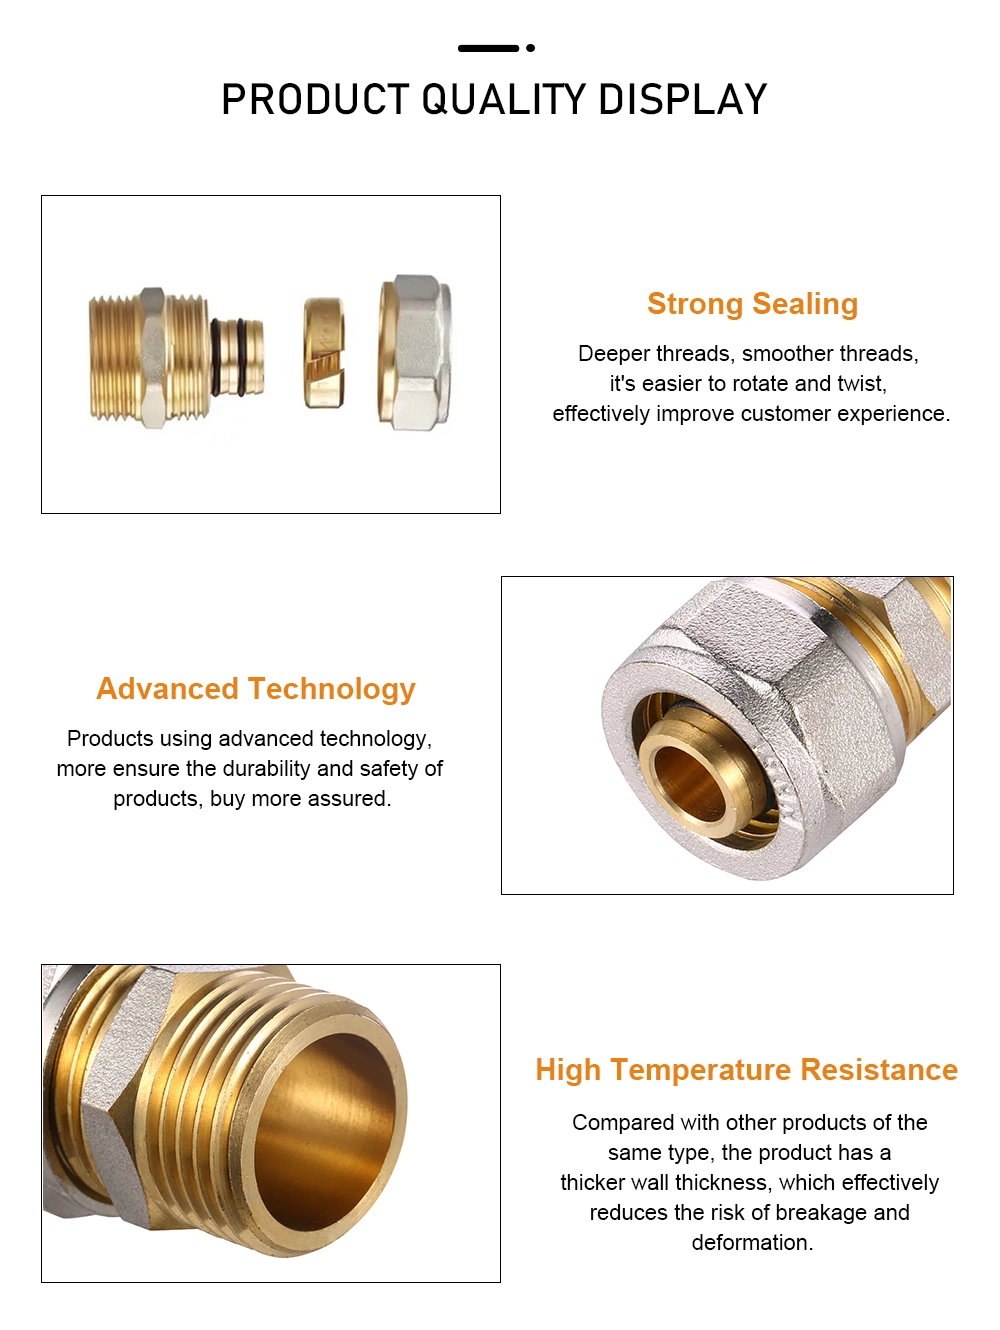 Plumbing Materials Underfloor Heating System Straight Male Plumbing Screw Socket Coupling Pipe Fittings Pex Brass Compression Fitting Brass Fittings